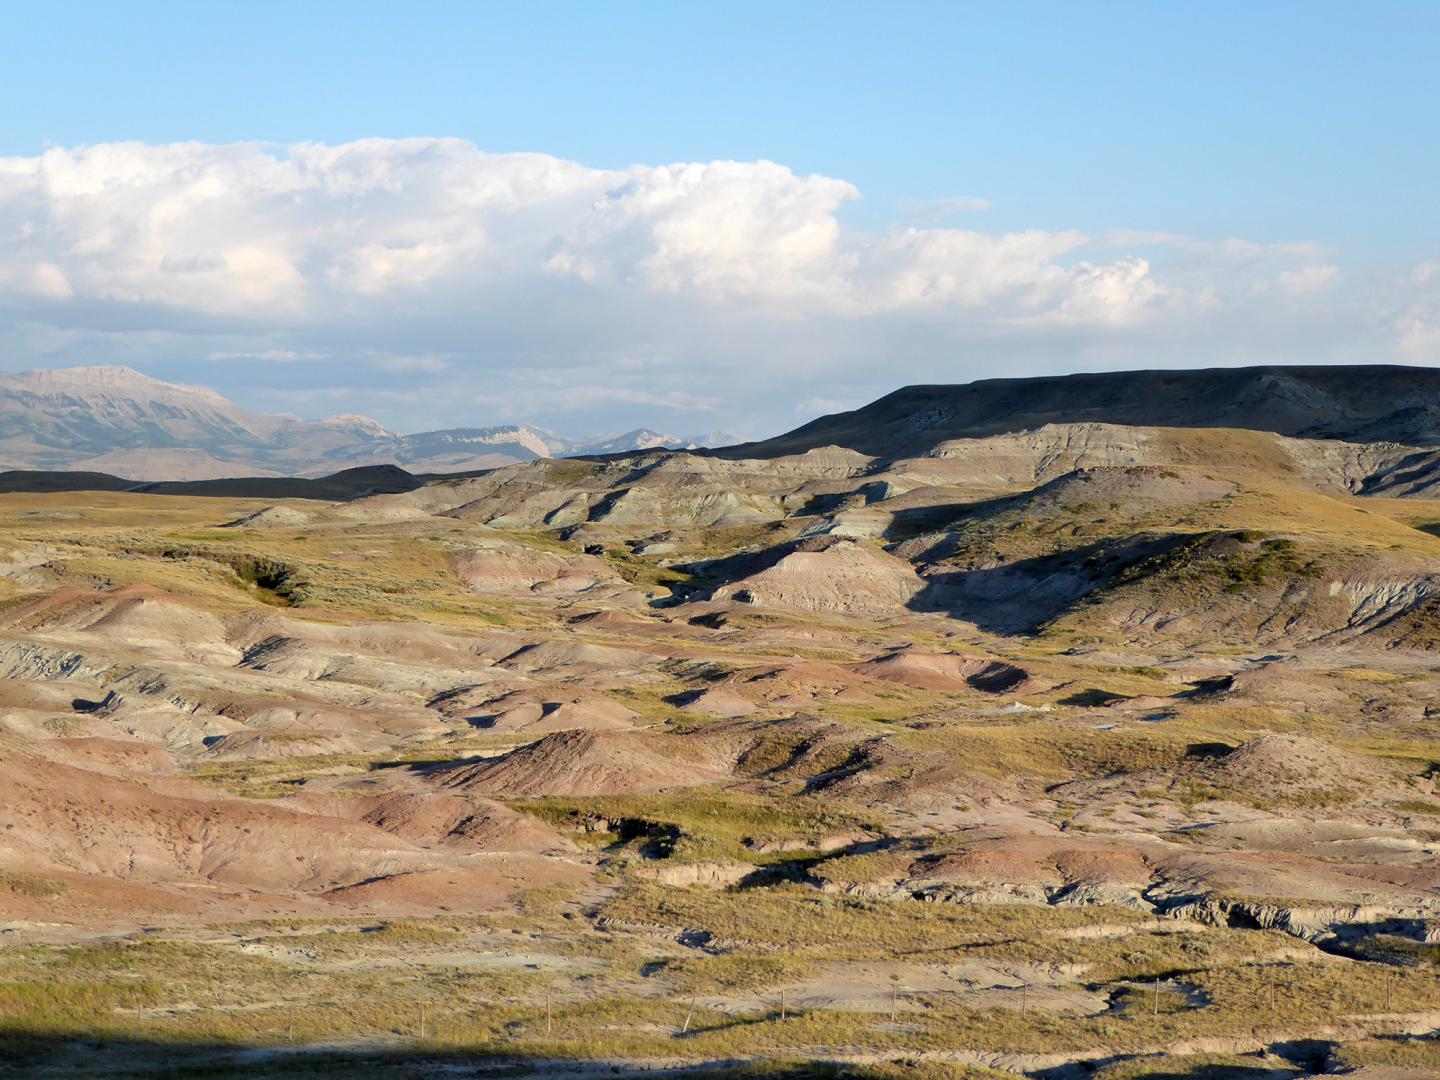 Landscape Of Bone Bed In Western Montana Where <i>Maiasaura</i> Fossils Were Collected